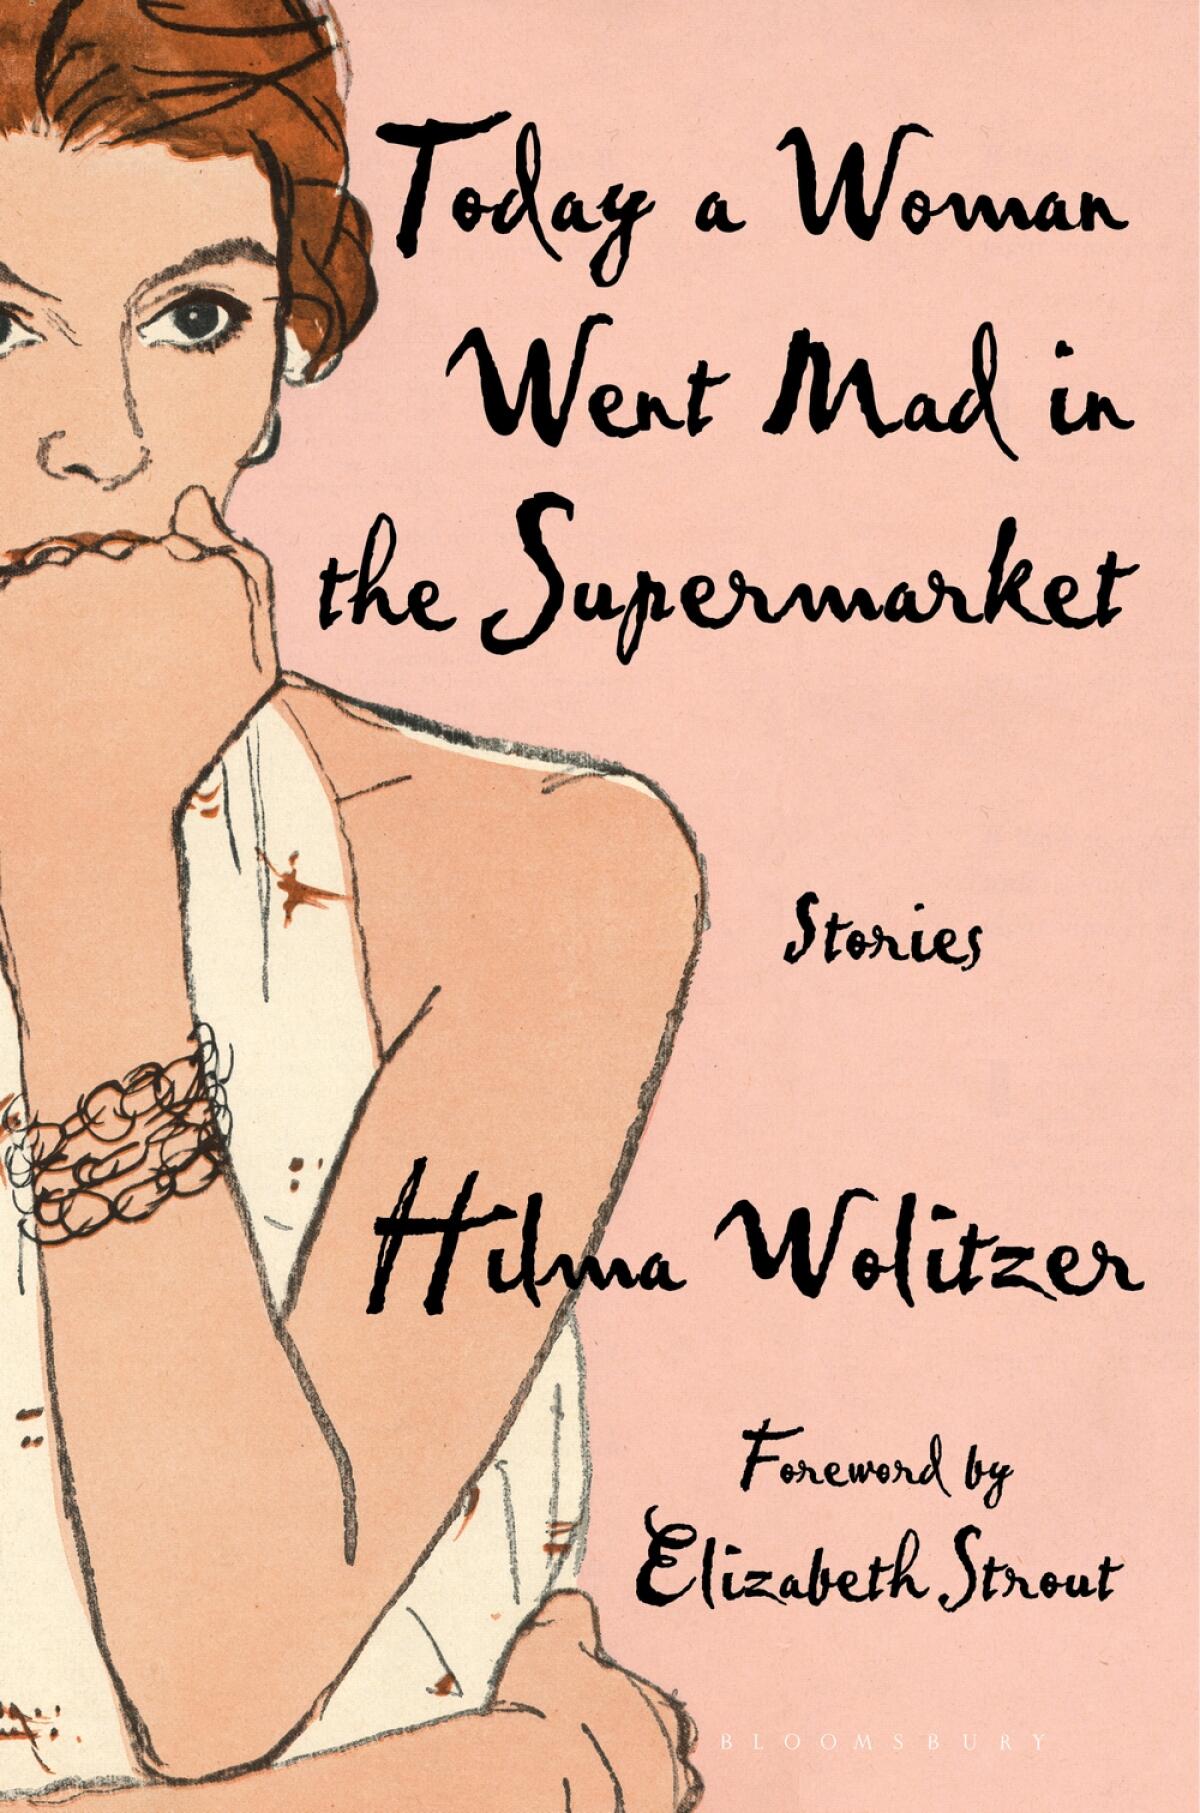 "Today a Woman Went Mad in the Supermarket" collects the wry short stories of Hilma Wolitzer, 91.